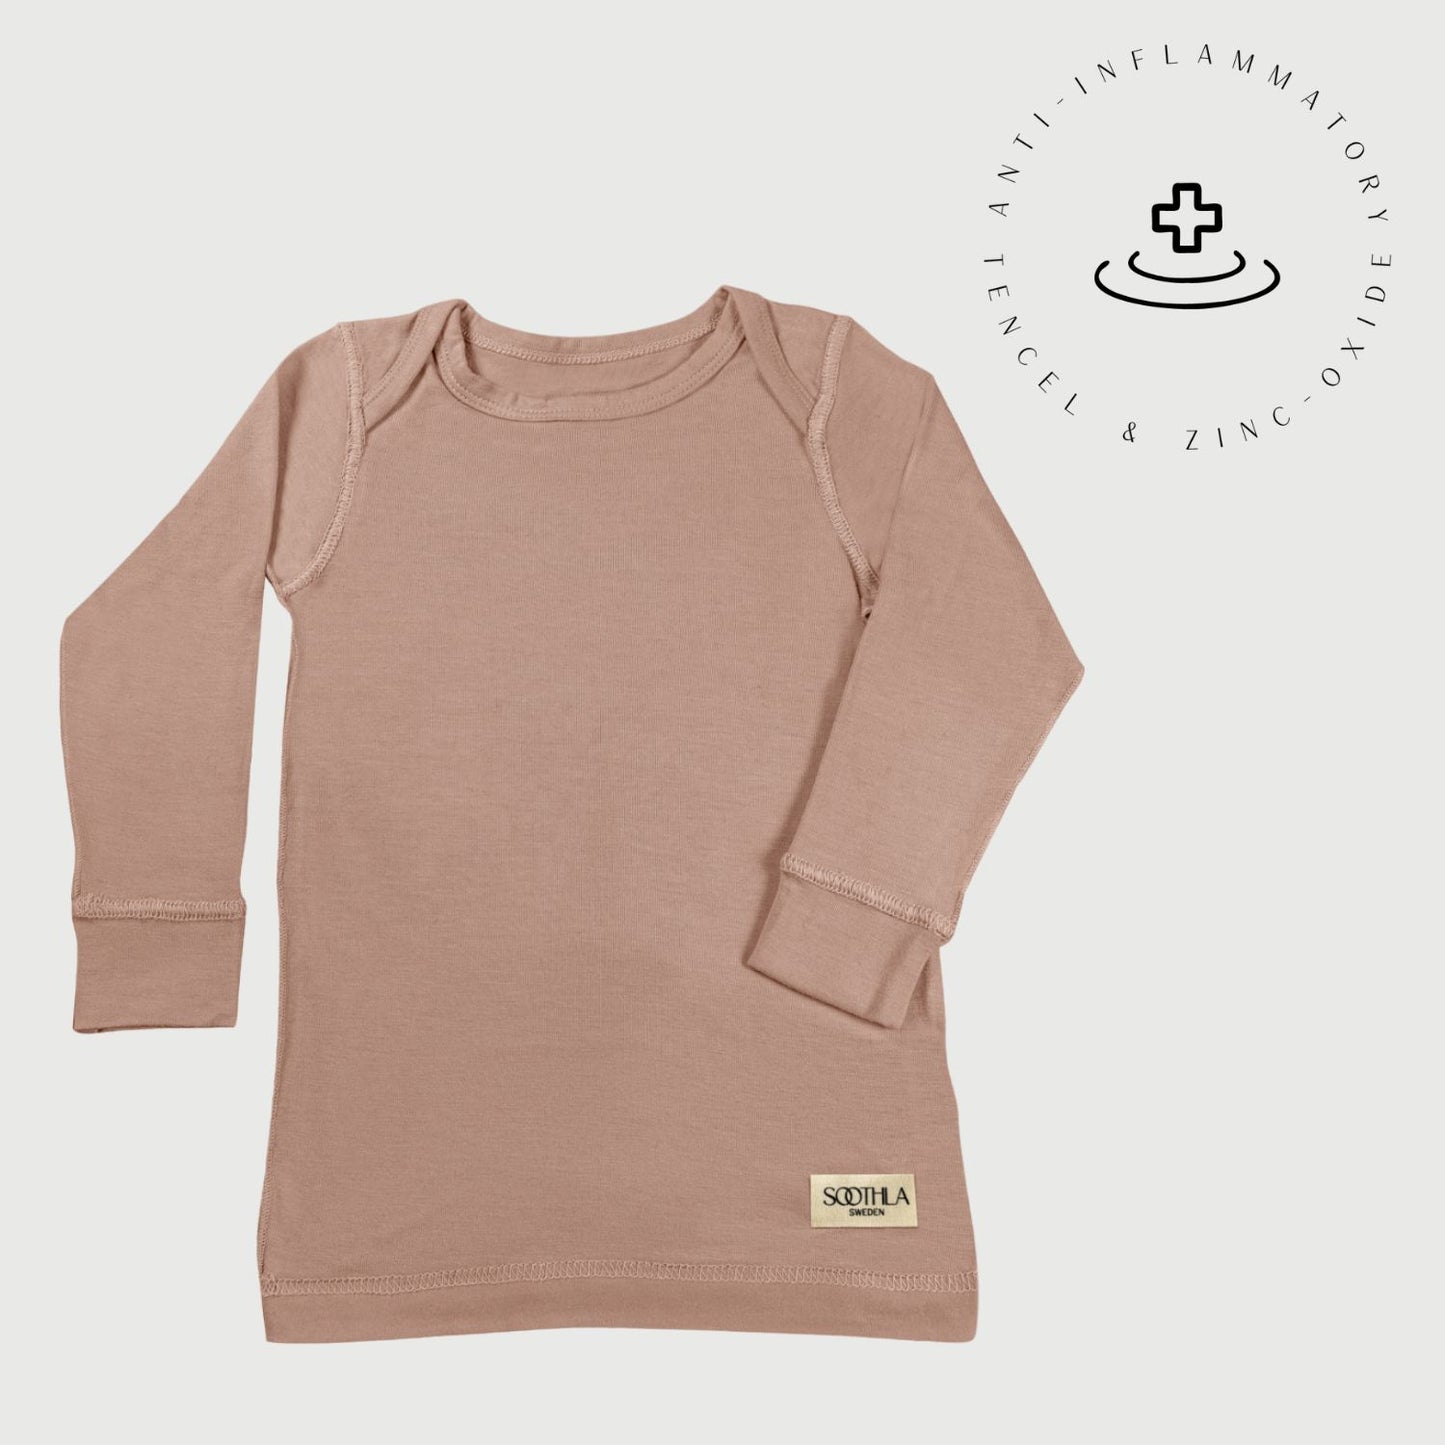 Long-sleeved baby top